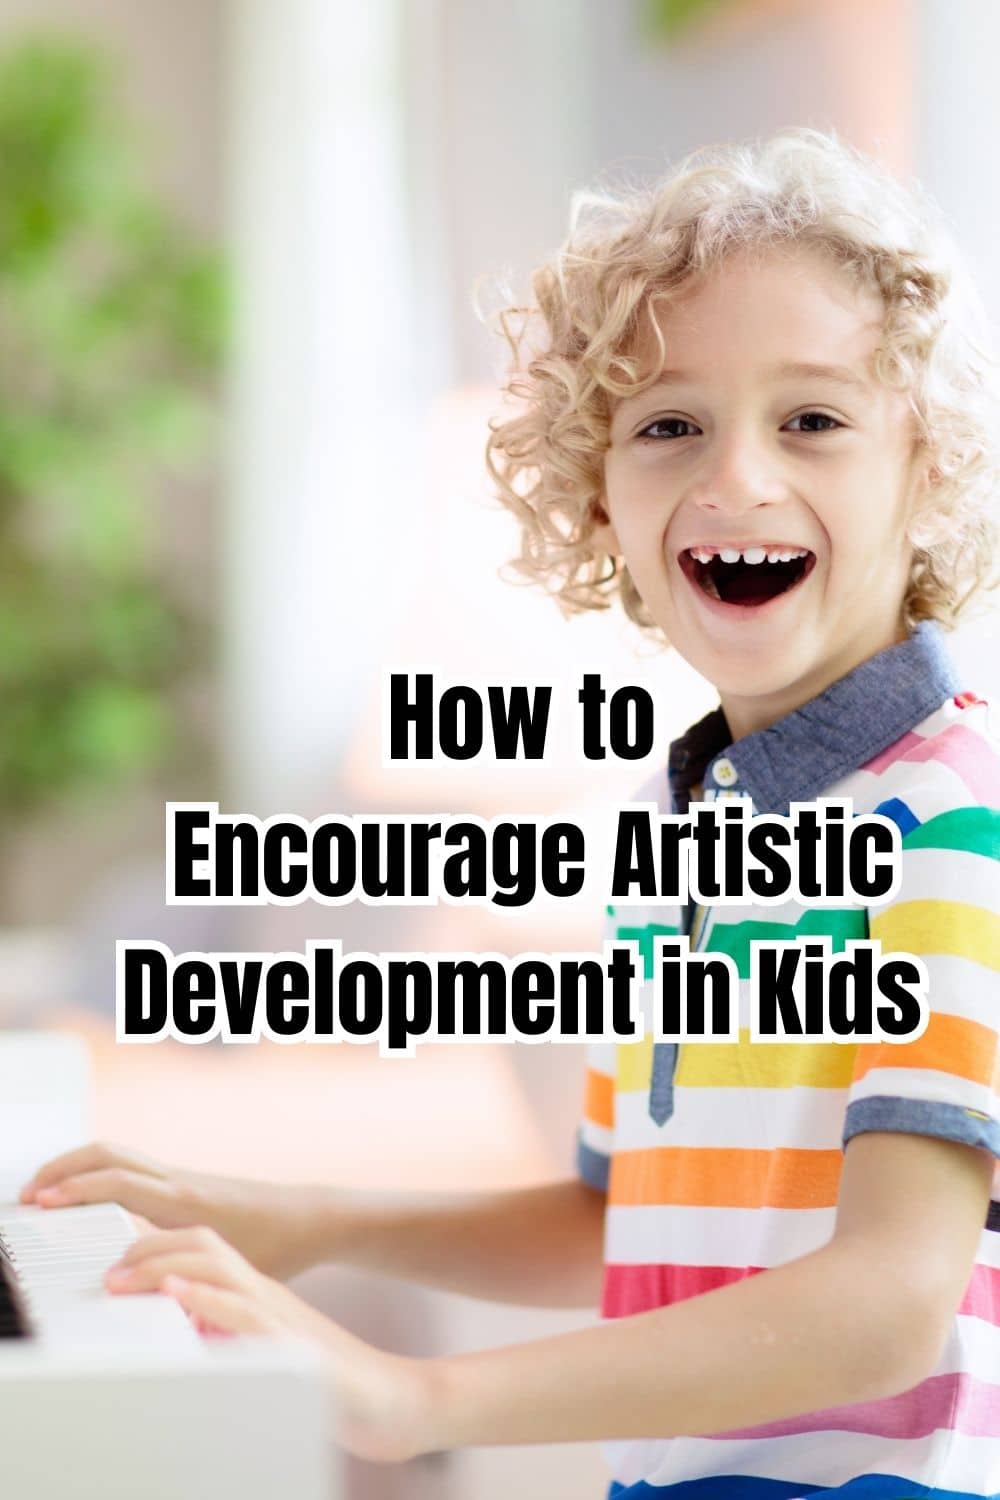 How to Encourage Artistic Development in Kids